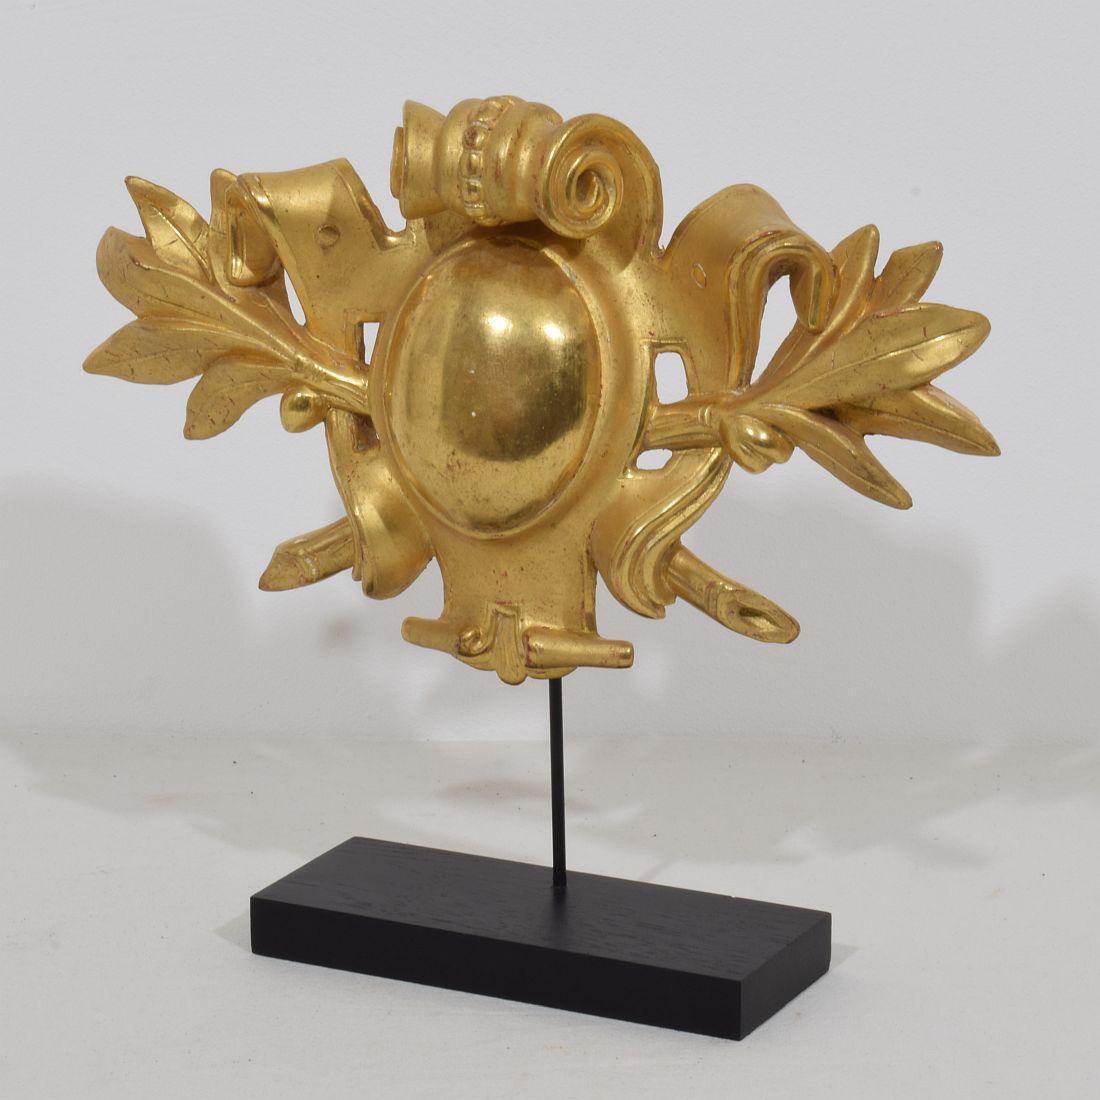 Beautiful carved gilt wood ornament Italy, circa 1850-1900.
Weathered.
Measurements include the wooden base.